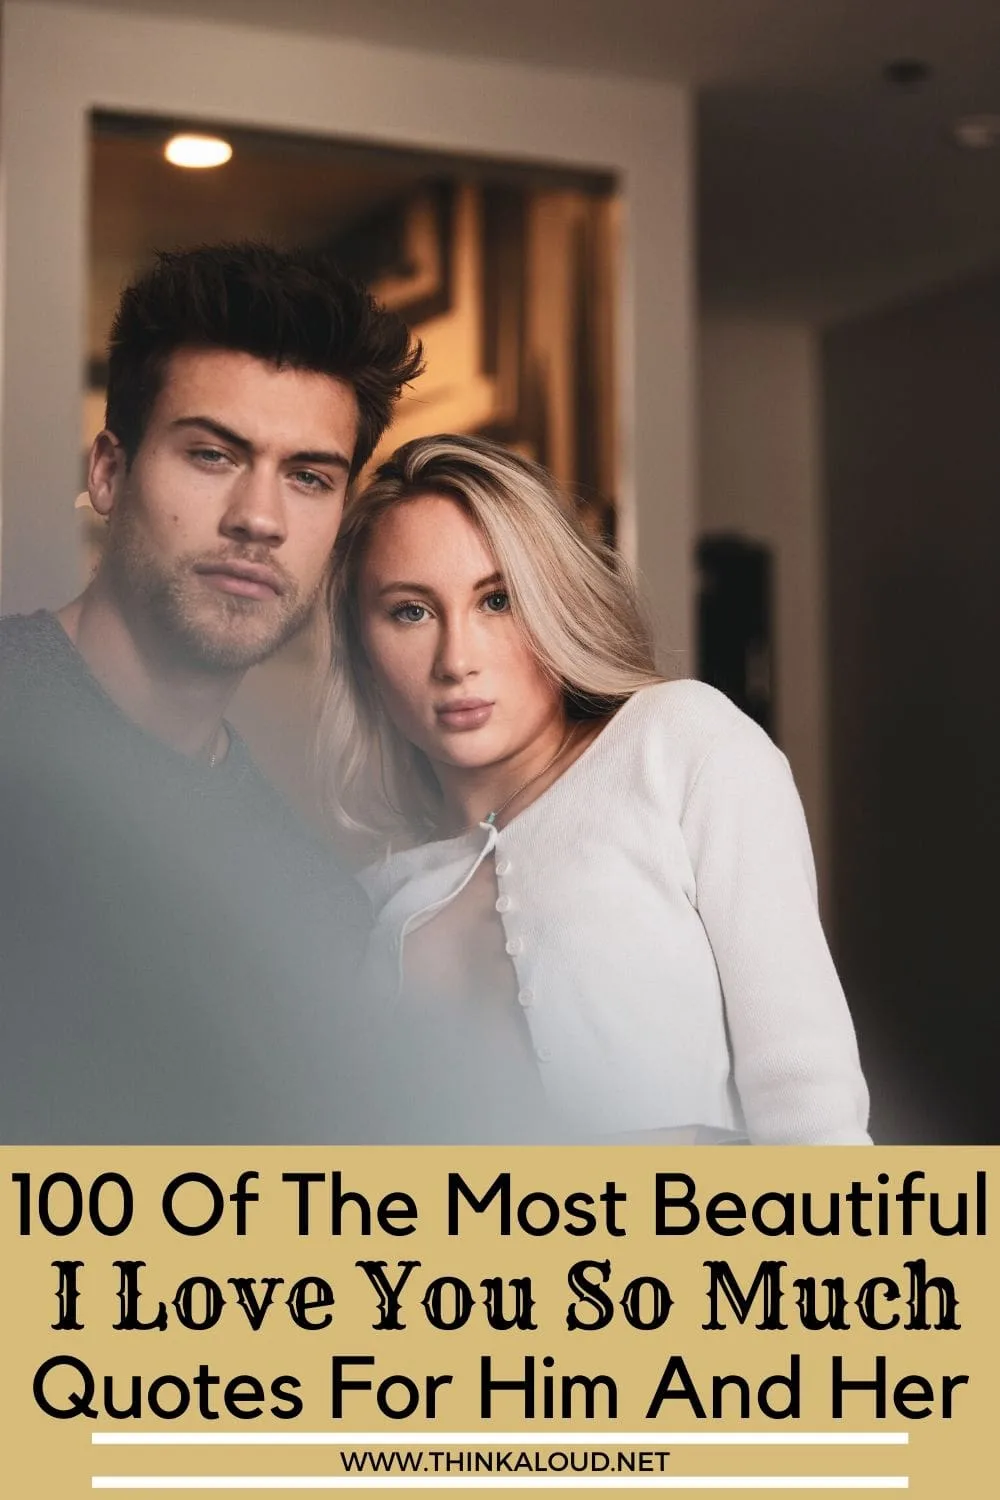 100 Of The Most Beautiful I Love You So Much Quotes For Him And Her